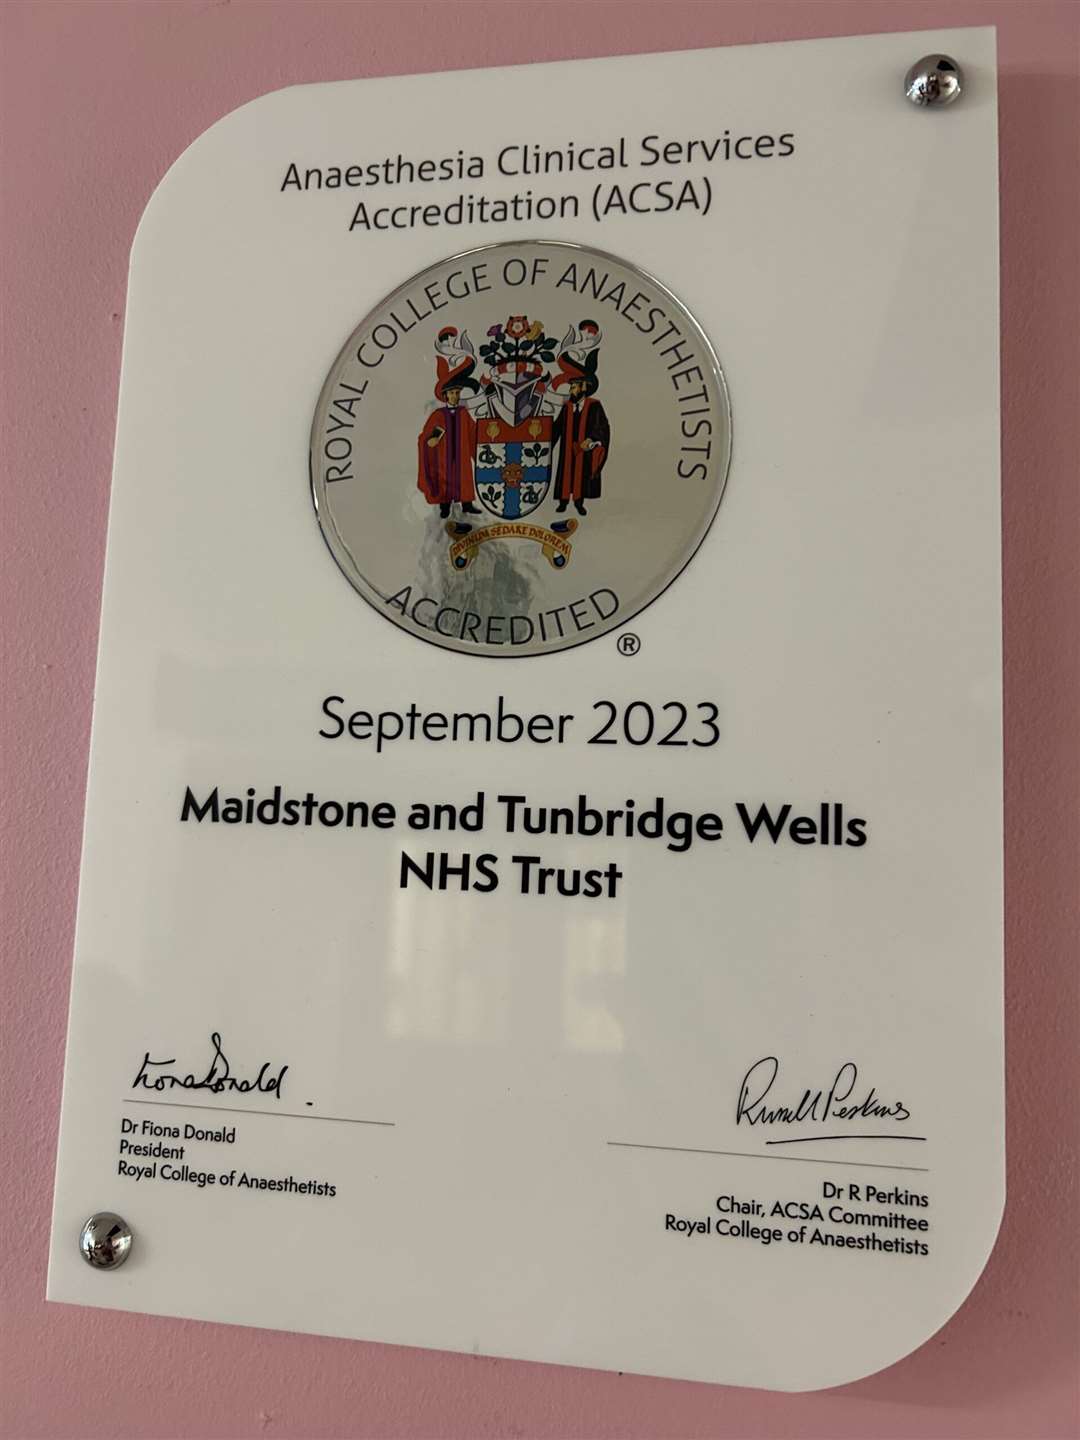 The award was given to the anaesthesia team at Maidstone and Tunbridge Wells Hospital